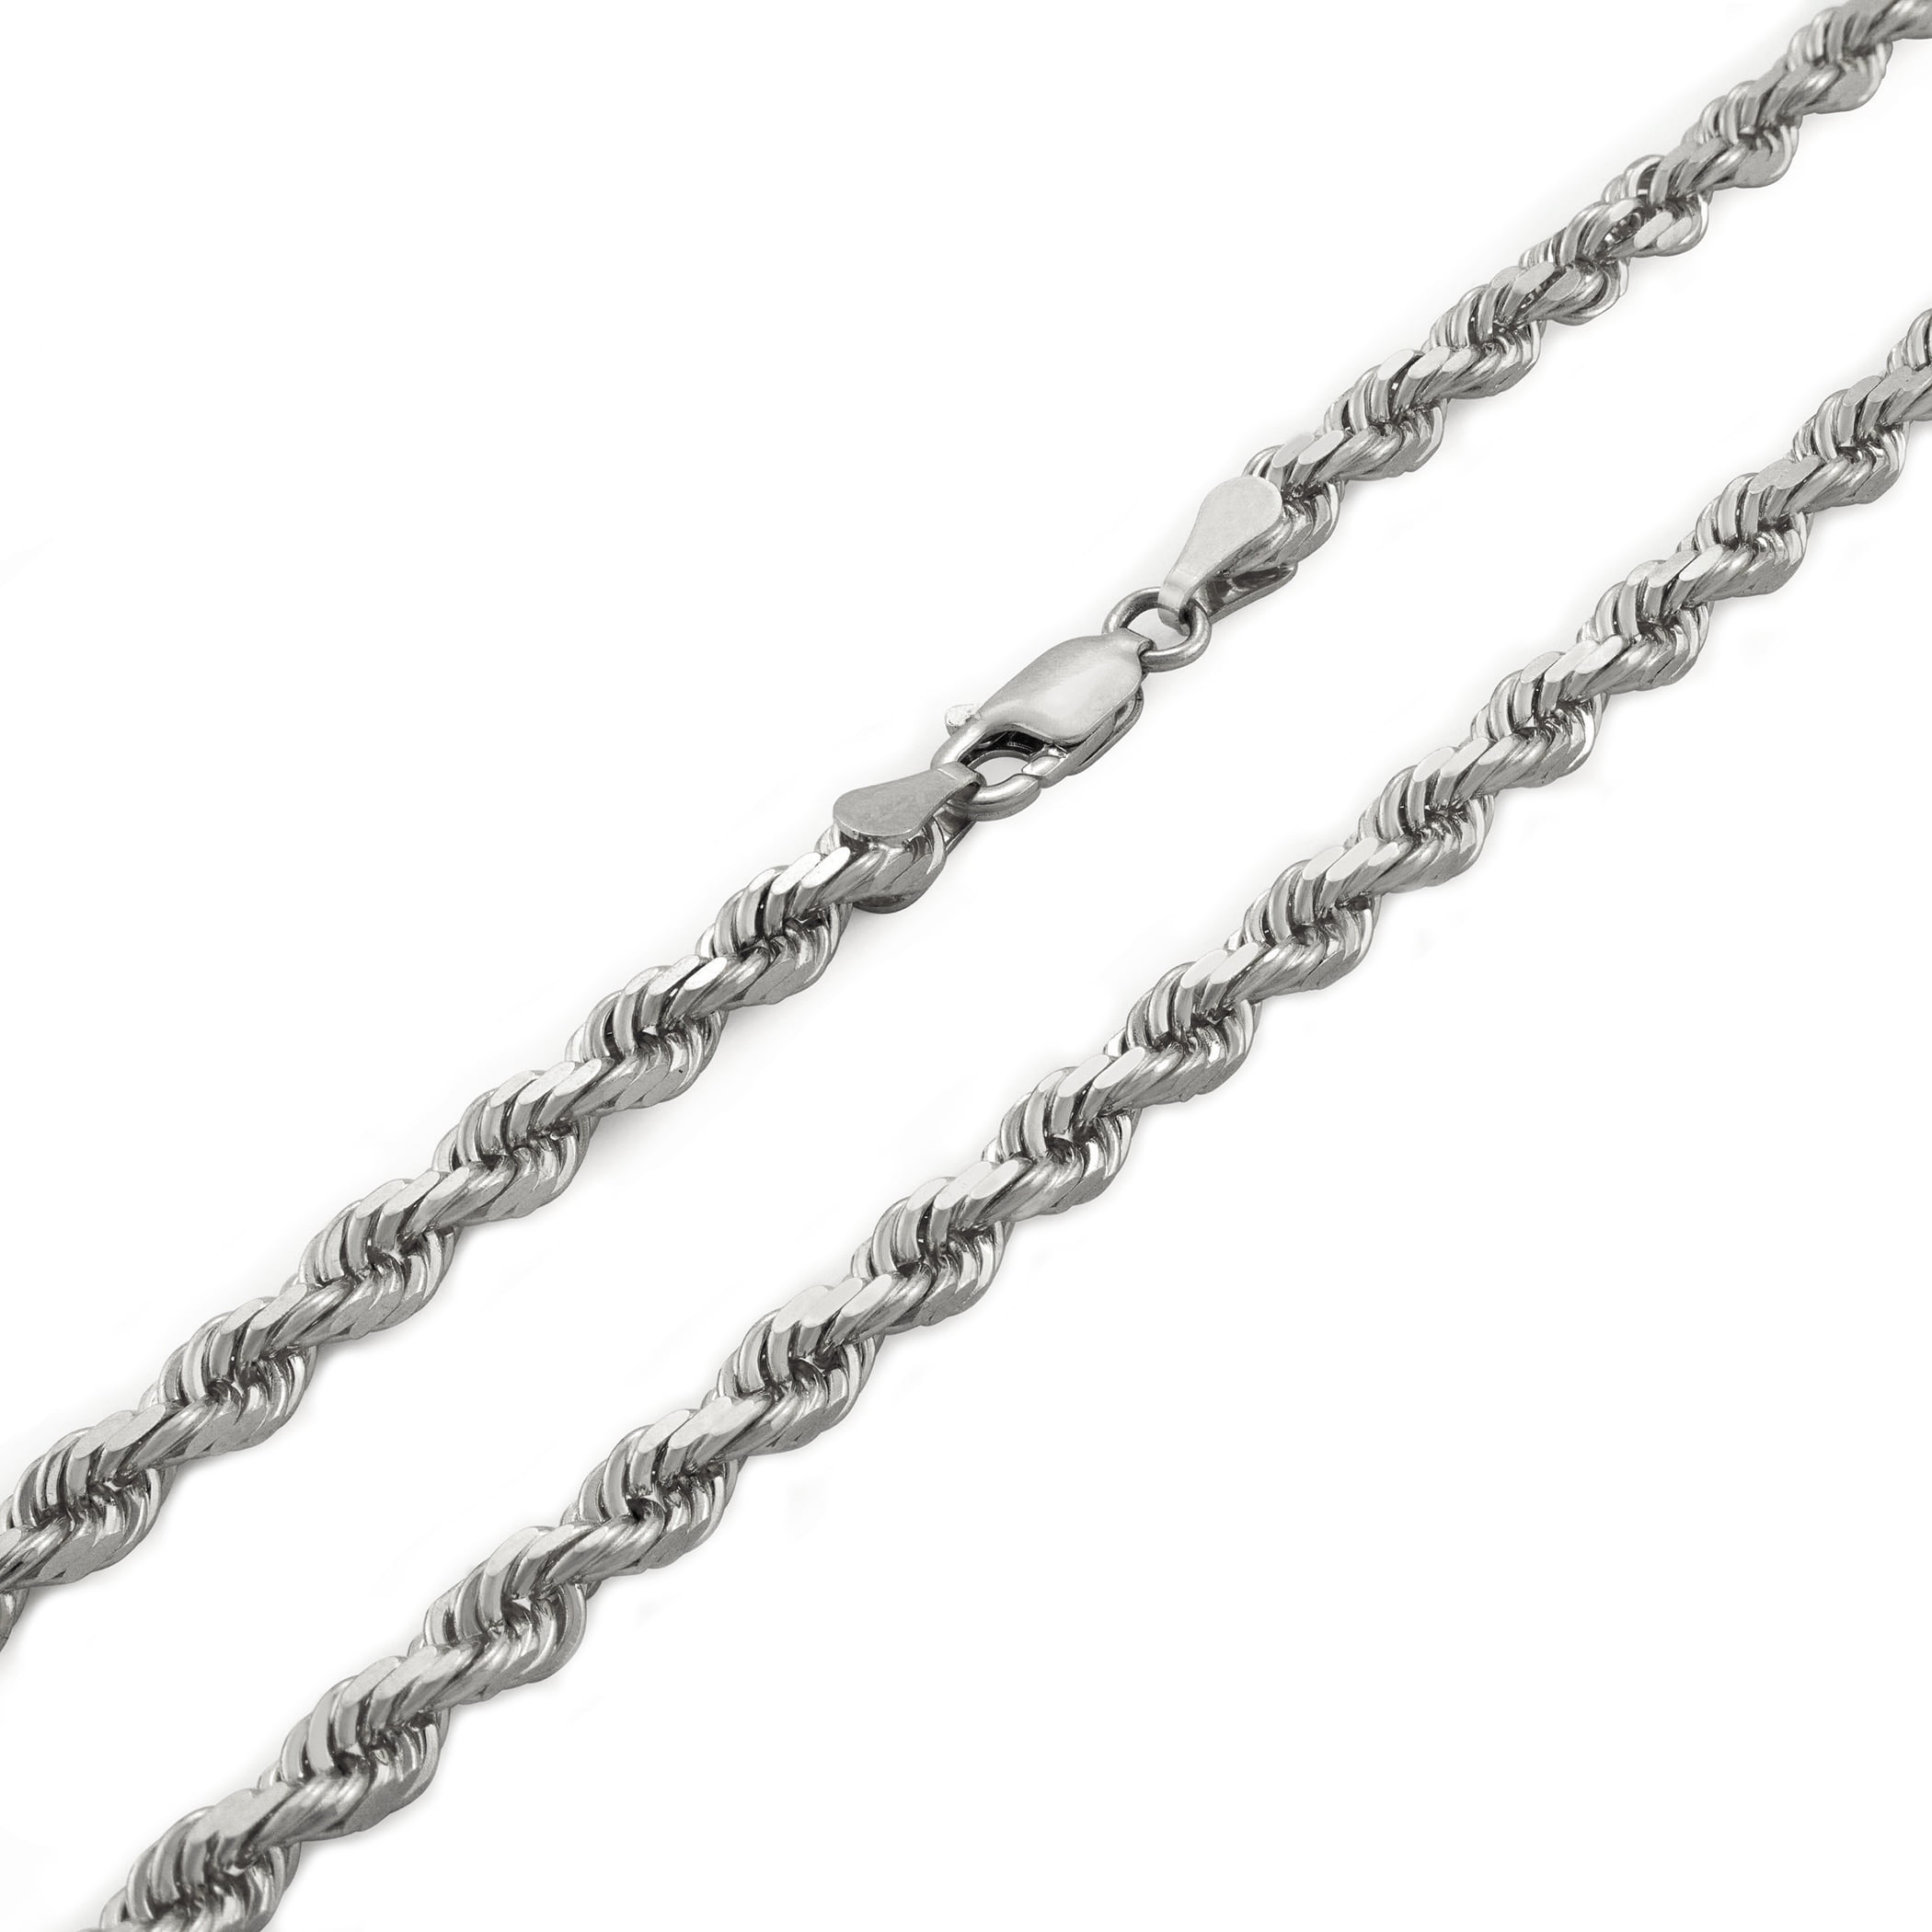 Necklace Silver Stainless Steel Unisex's Chain Men Women  20-30 inches 3-8mm 